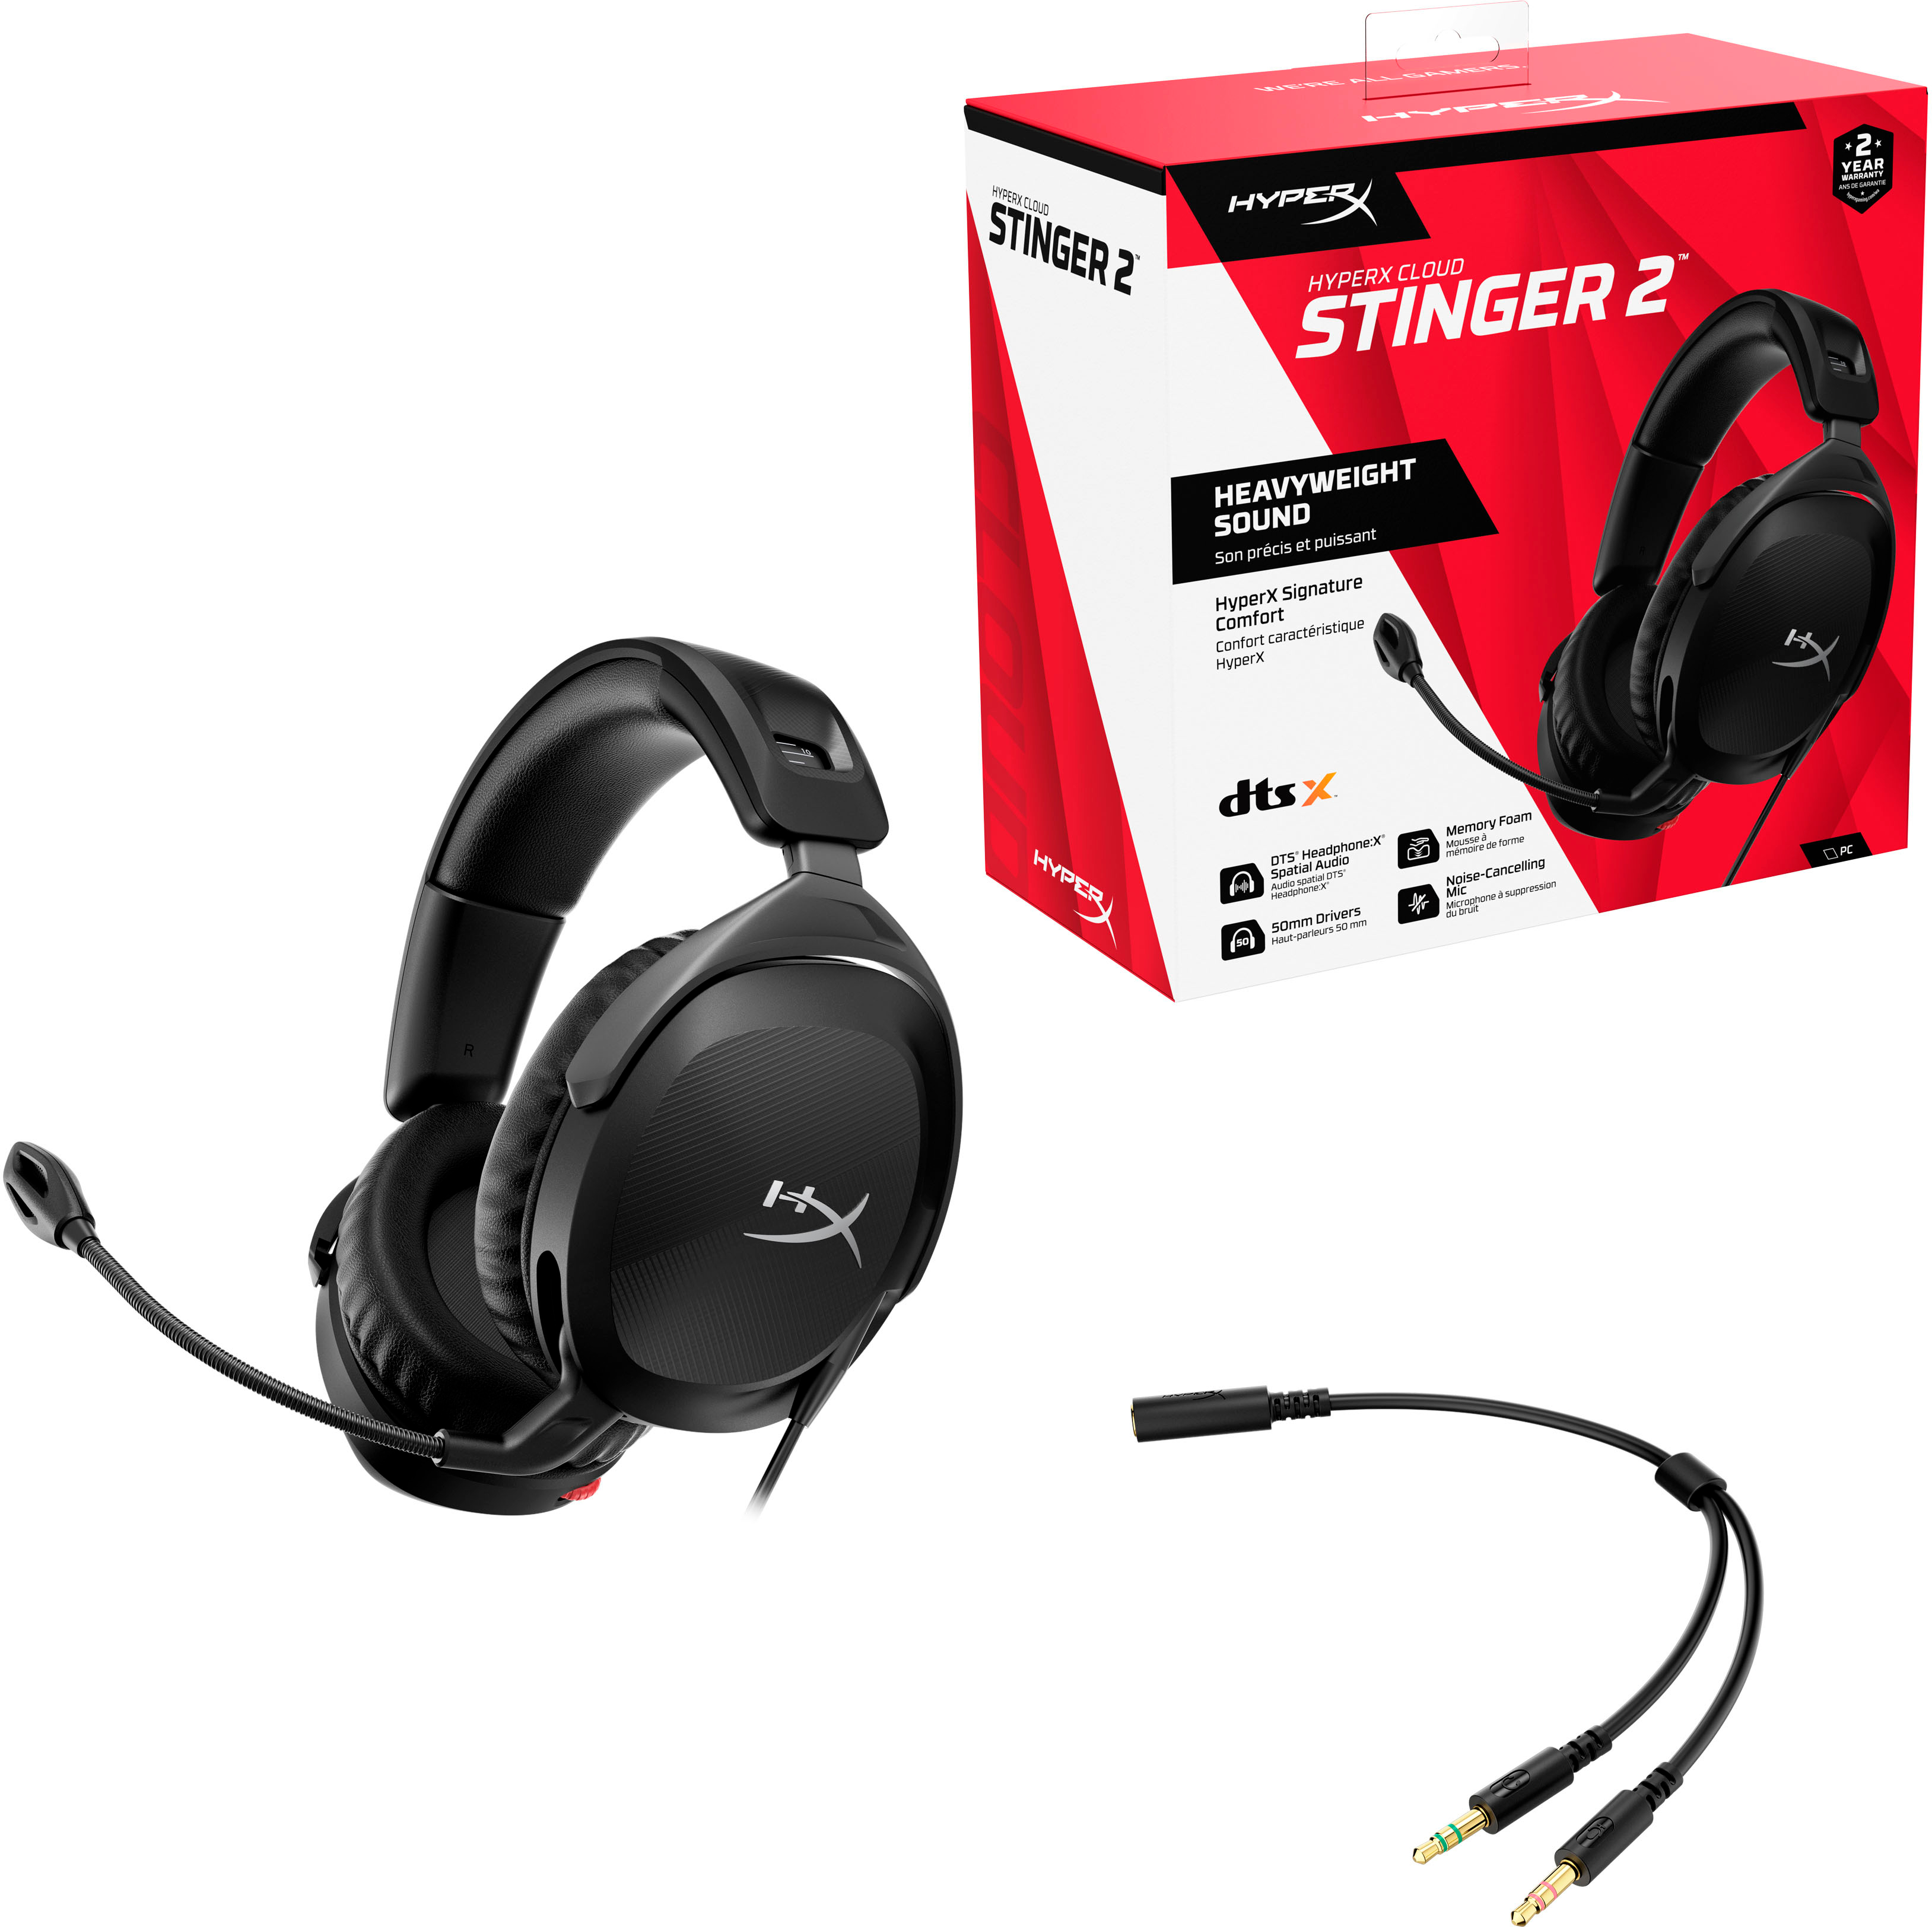 Black 2 for PC Best Stinger 519T1AA Headset - Buy Wired Cloud HyperX Gaming